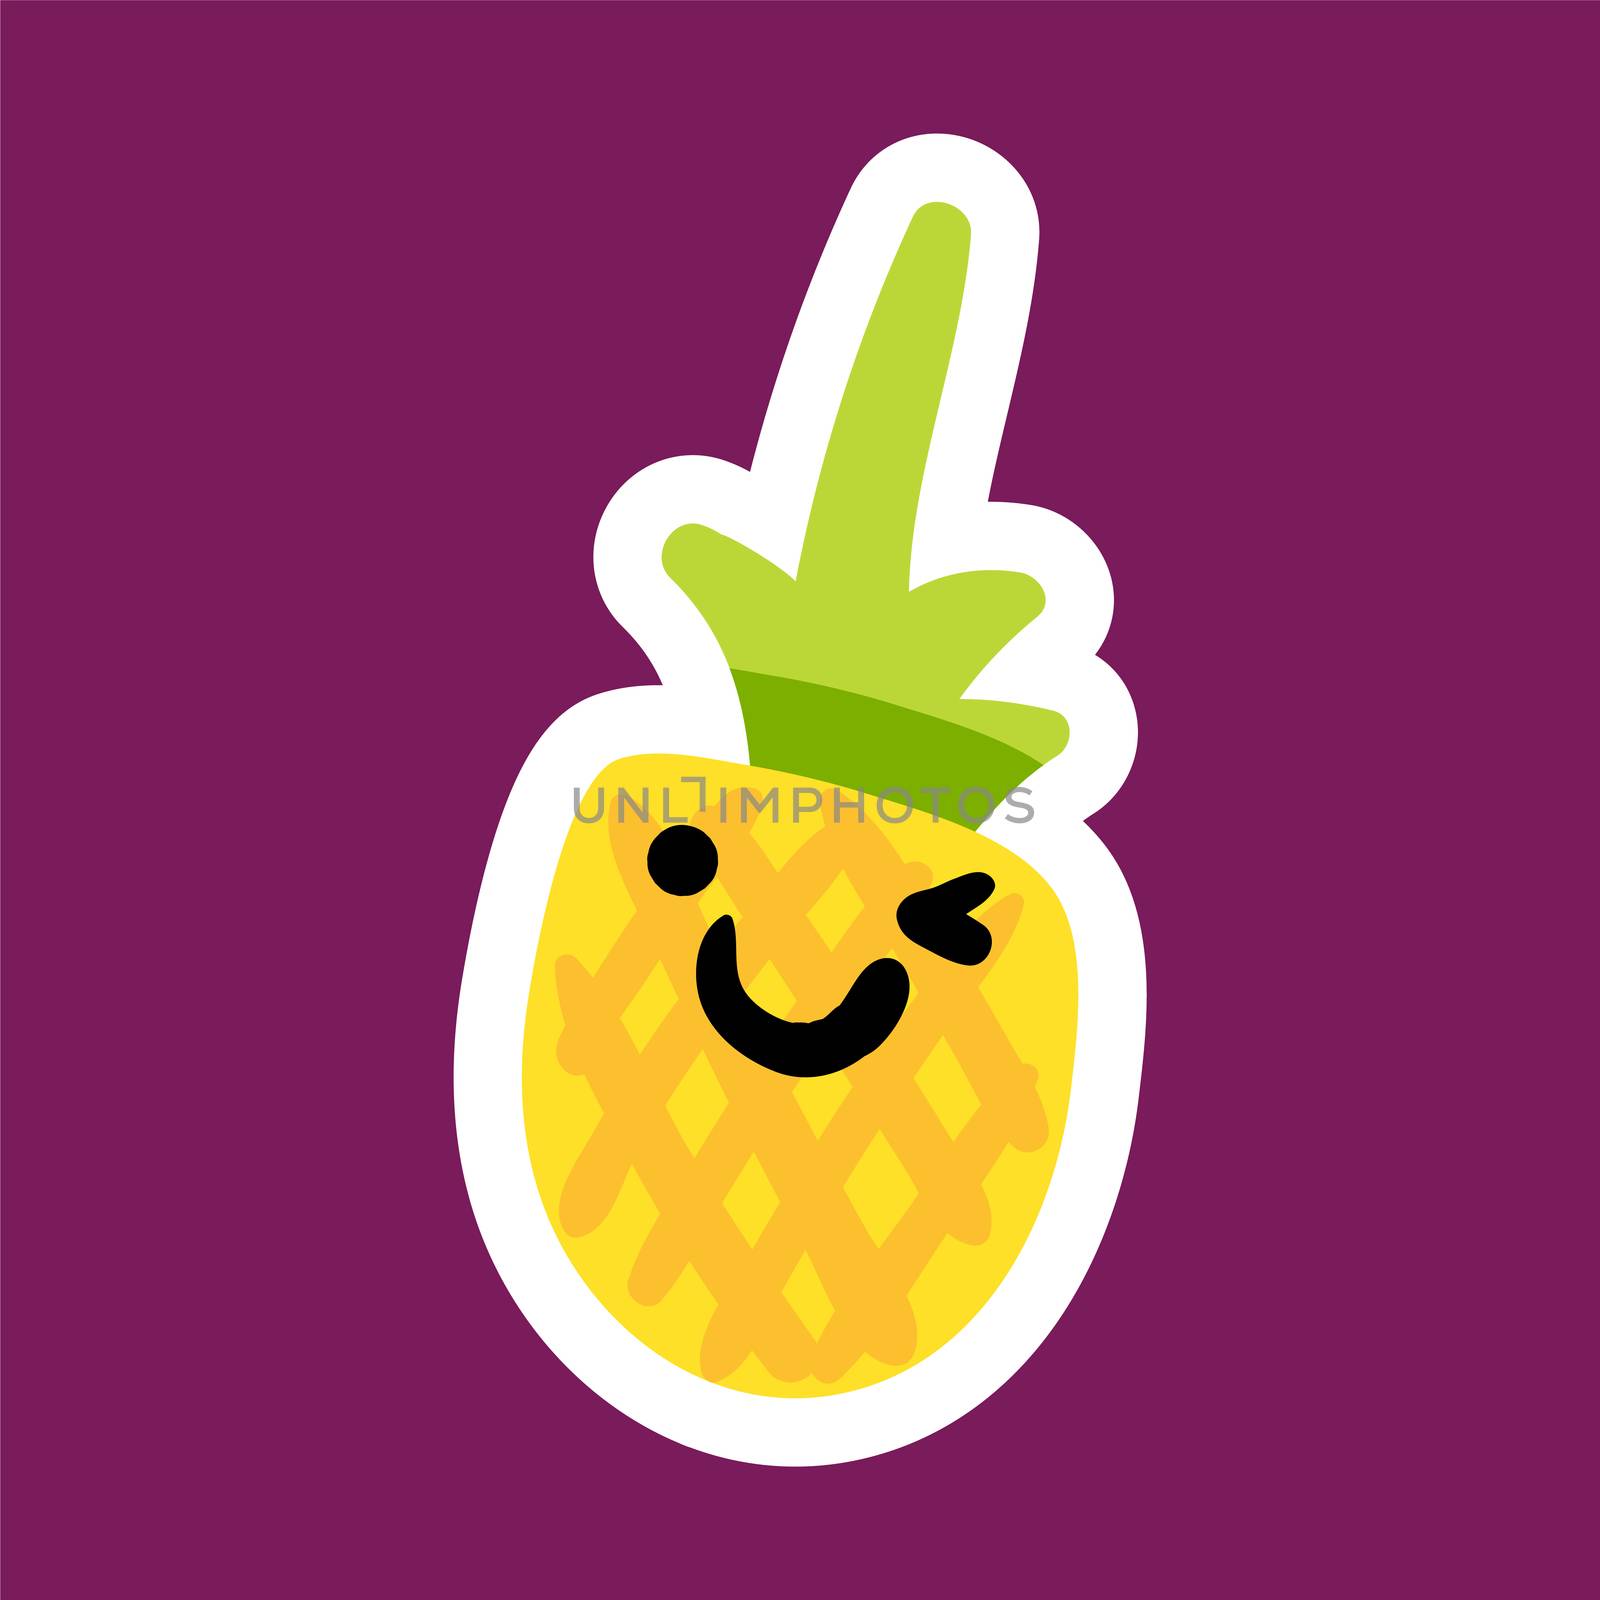 Sticker with pineapple by barsrsind